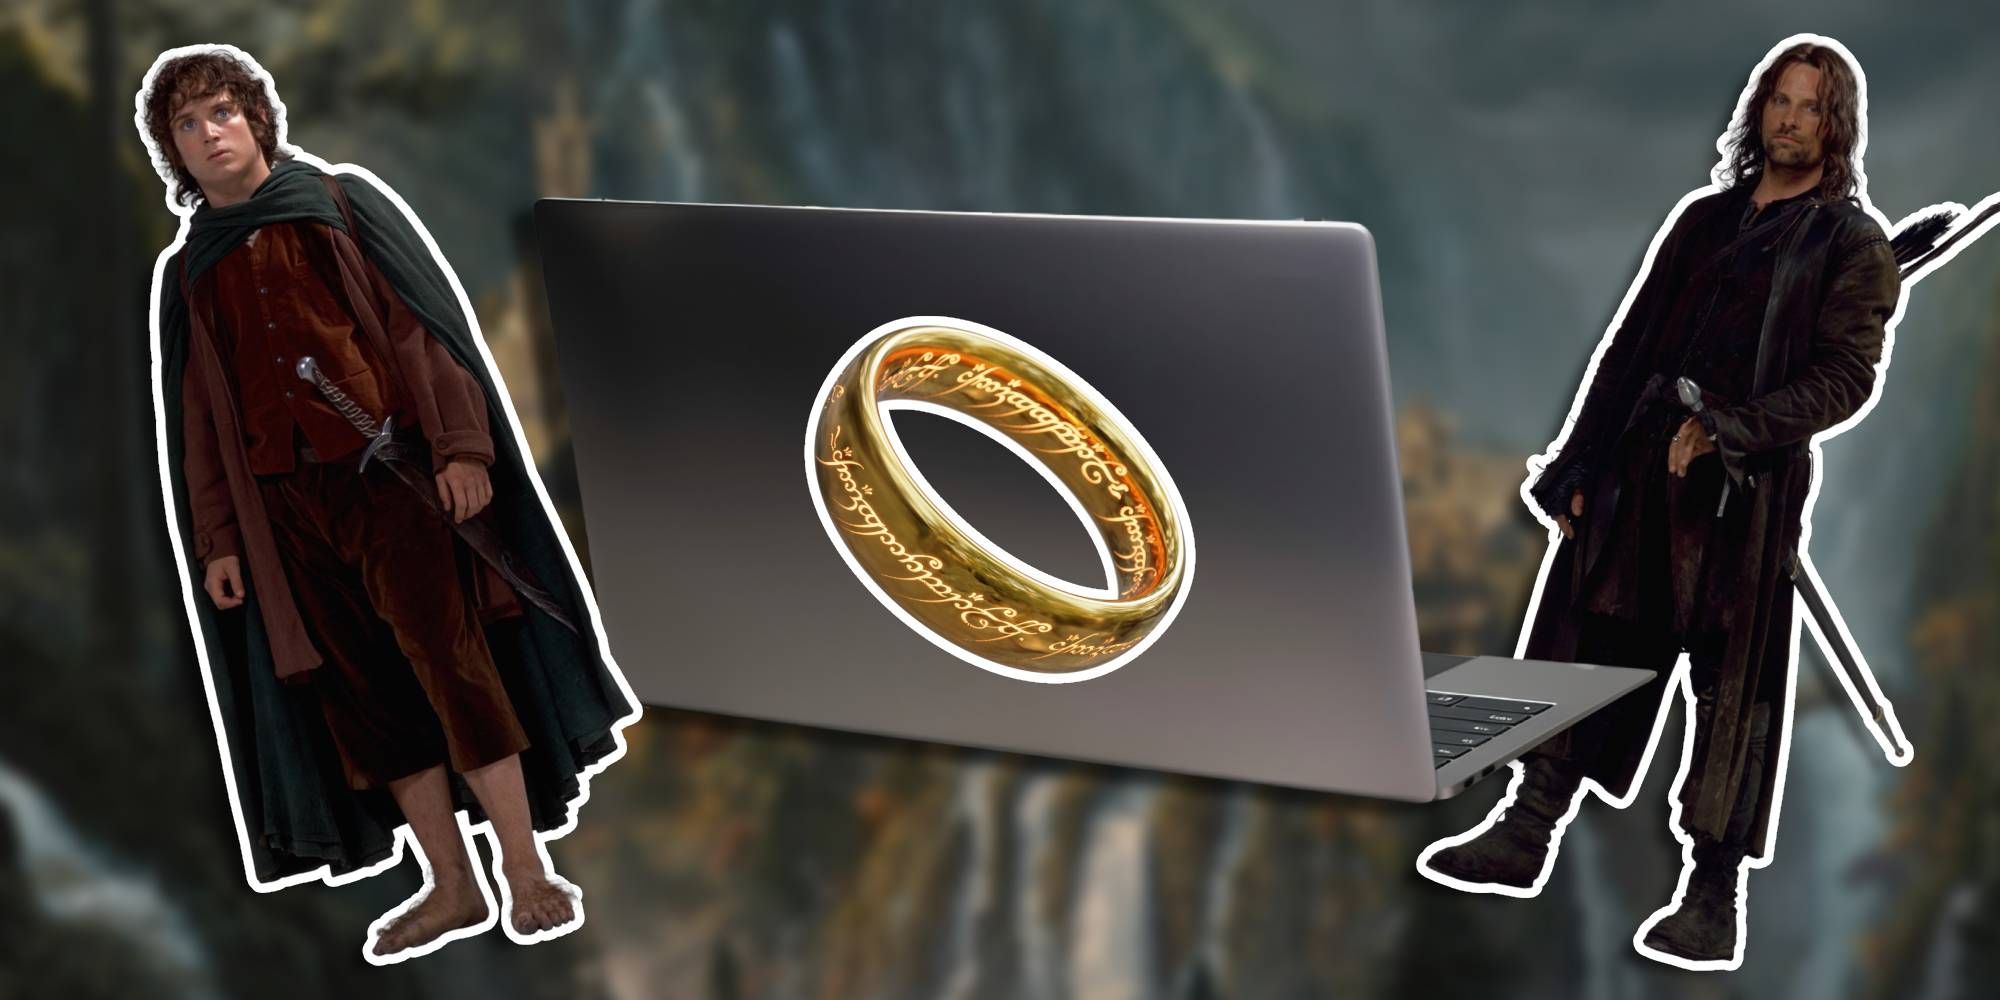 Lord of the Rings Sticker packs Feature